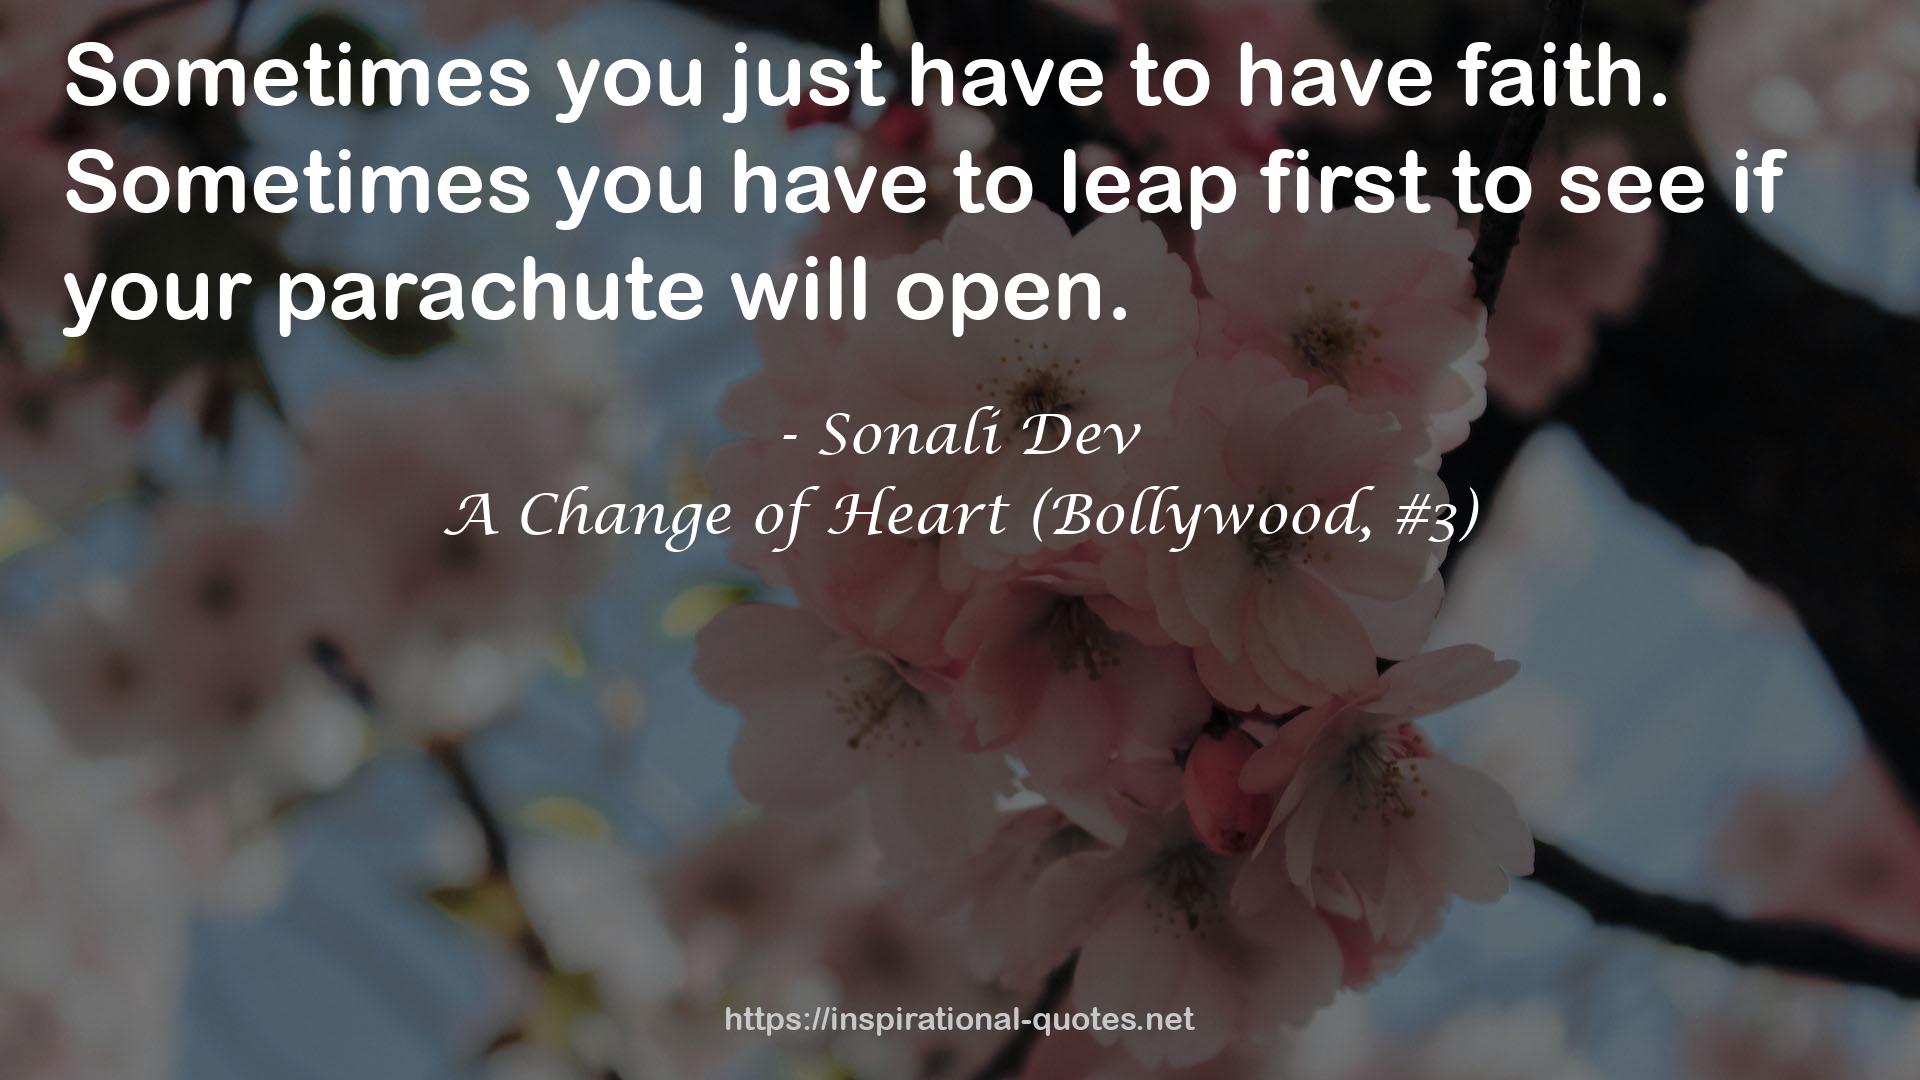 A Change of Heart (Bollywood, #3) QUOTES